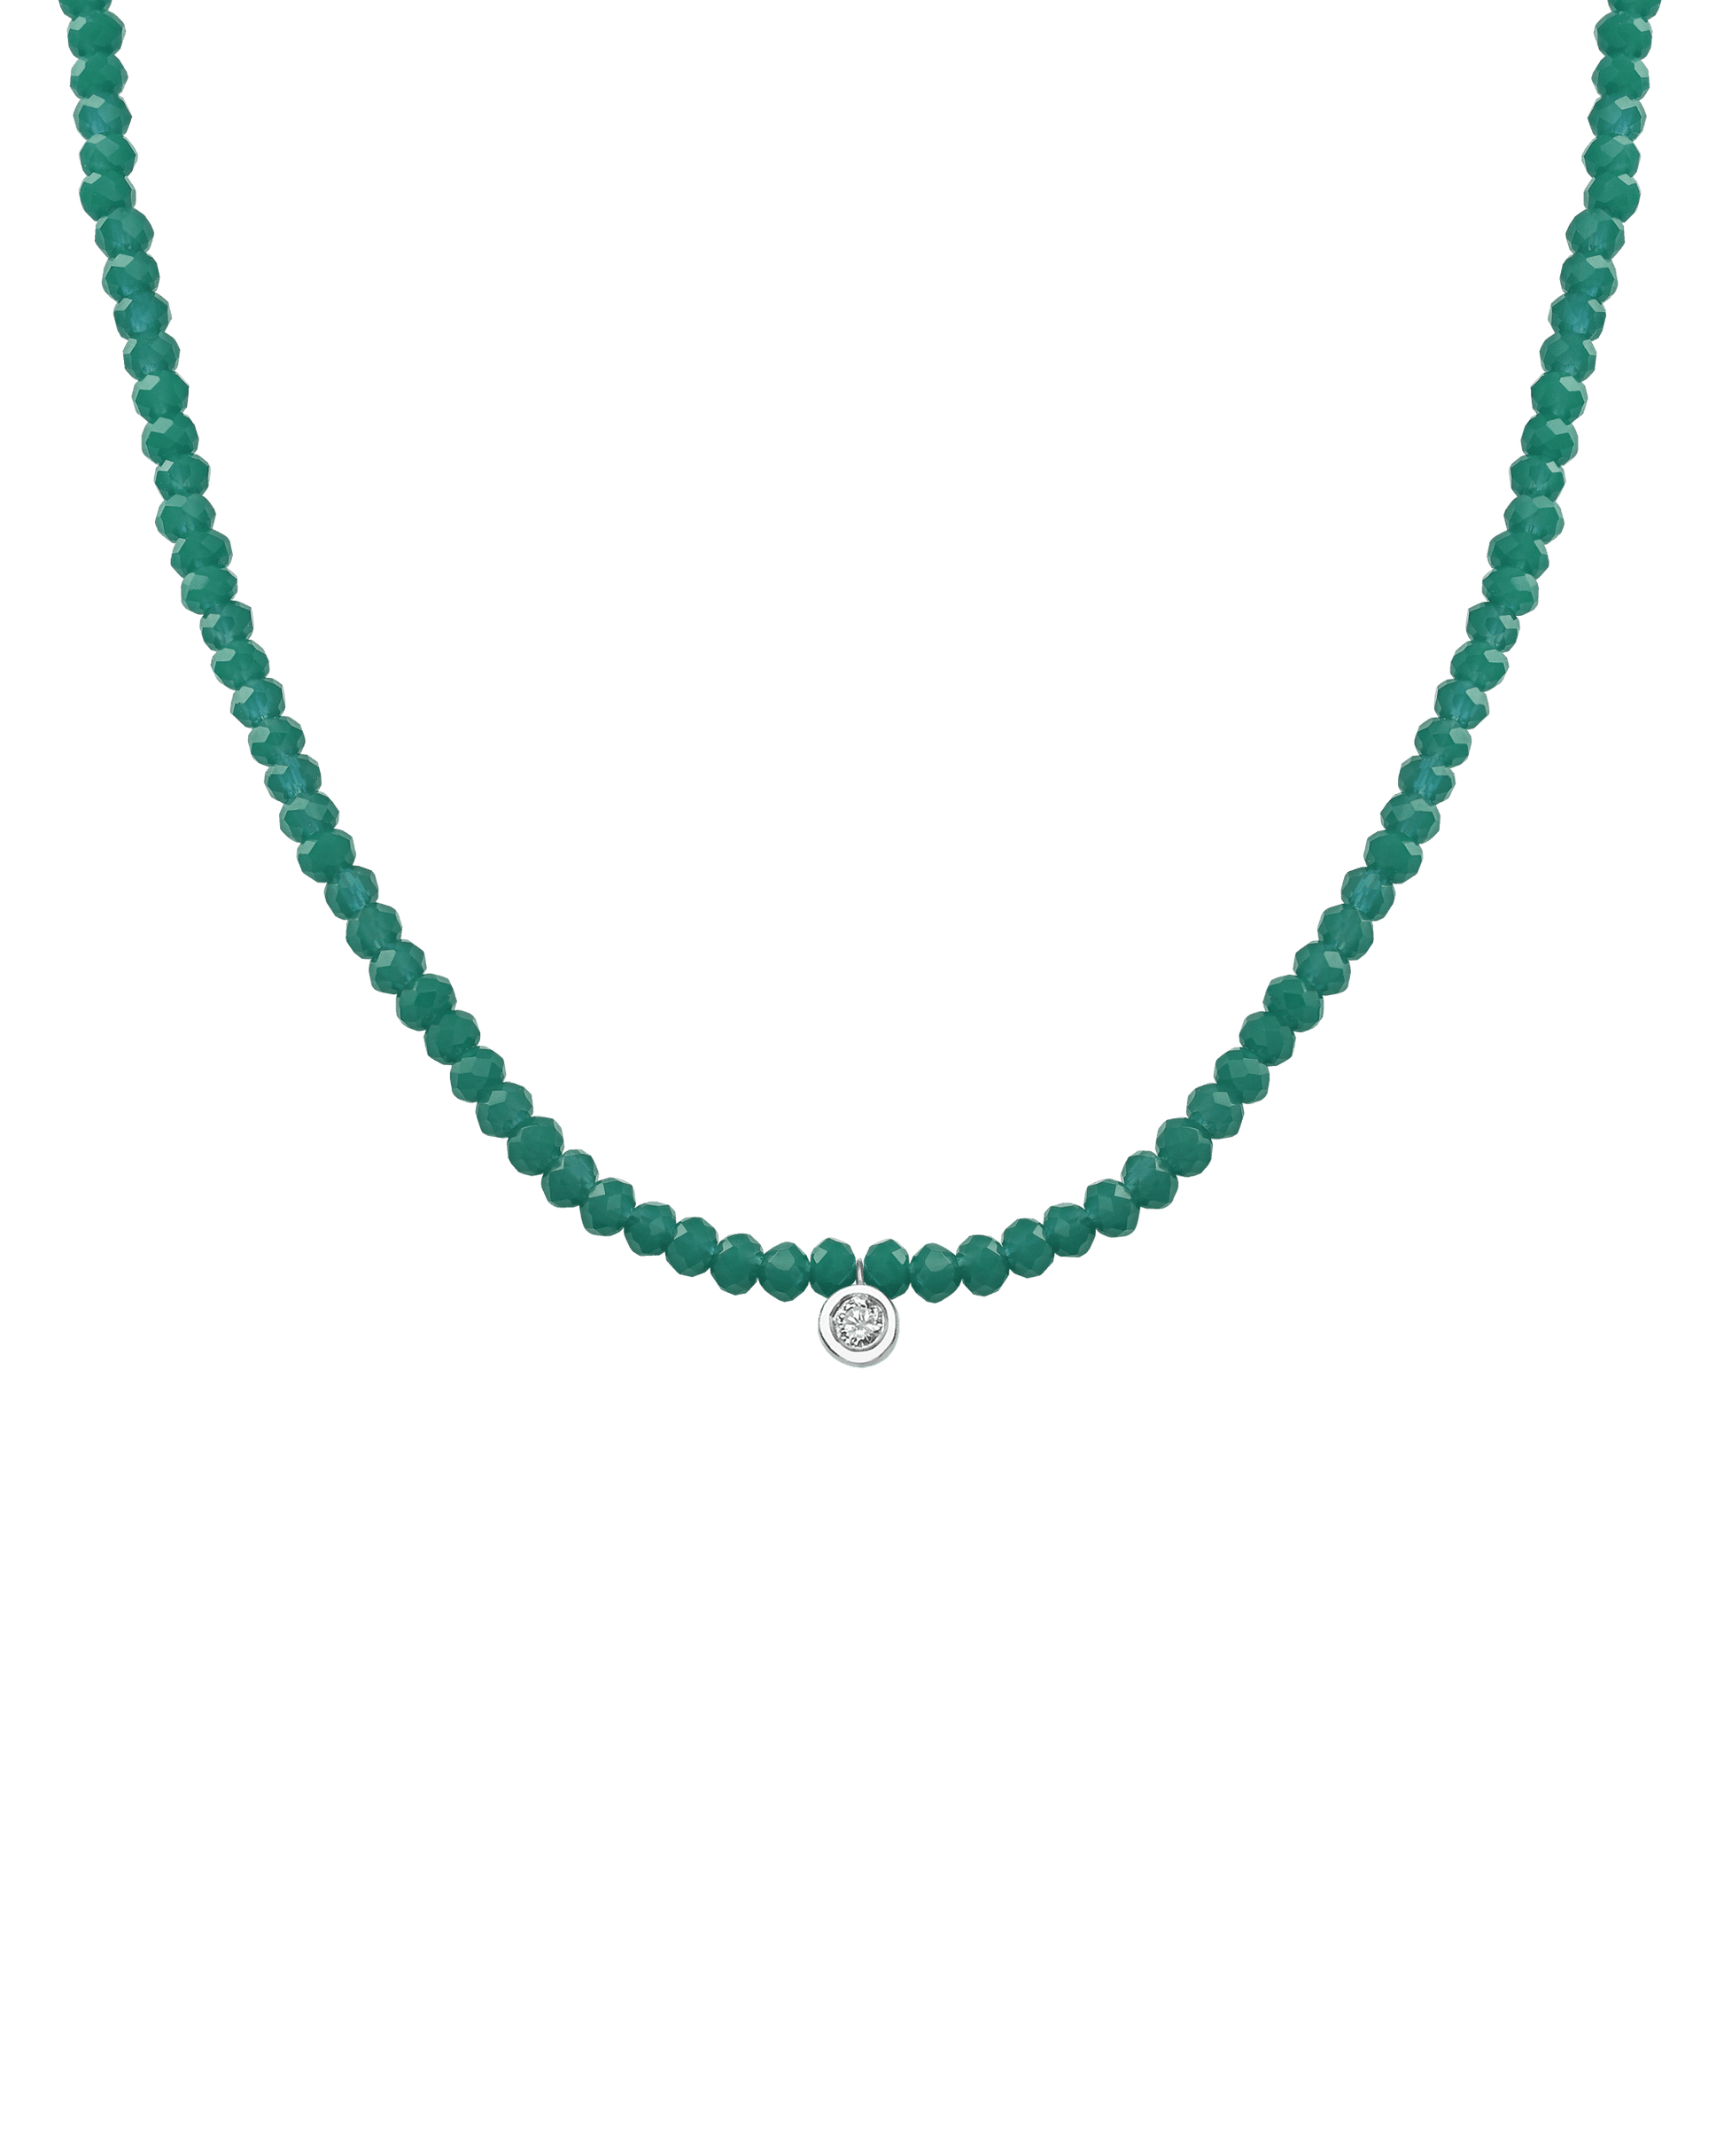 The Gemstone & Diamond Necklace - 14K White Gold Necklaces 14K Solid Gold Natural Emerald Medium: 0.04ct 14"